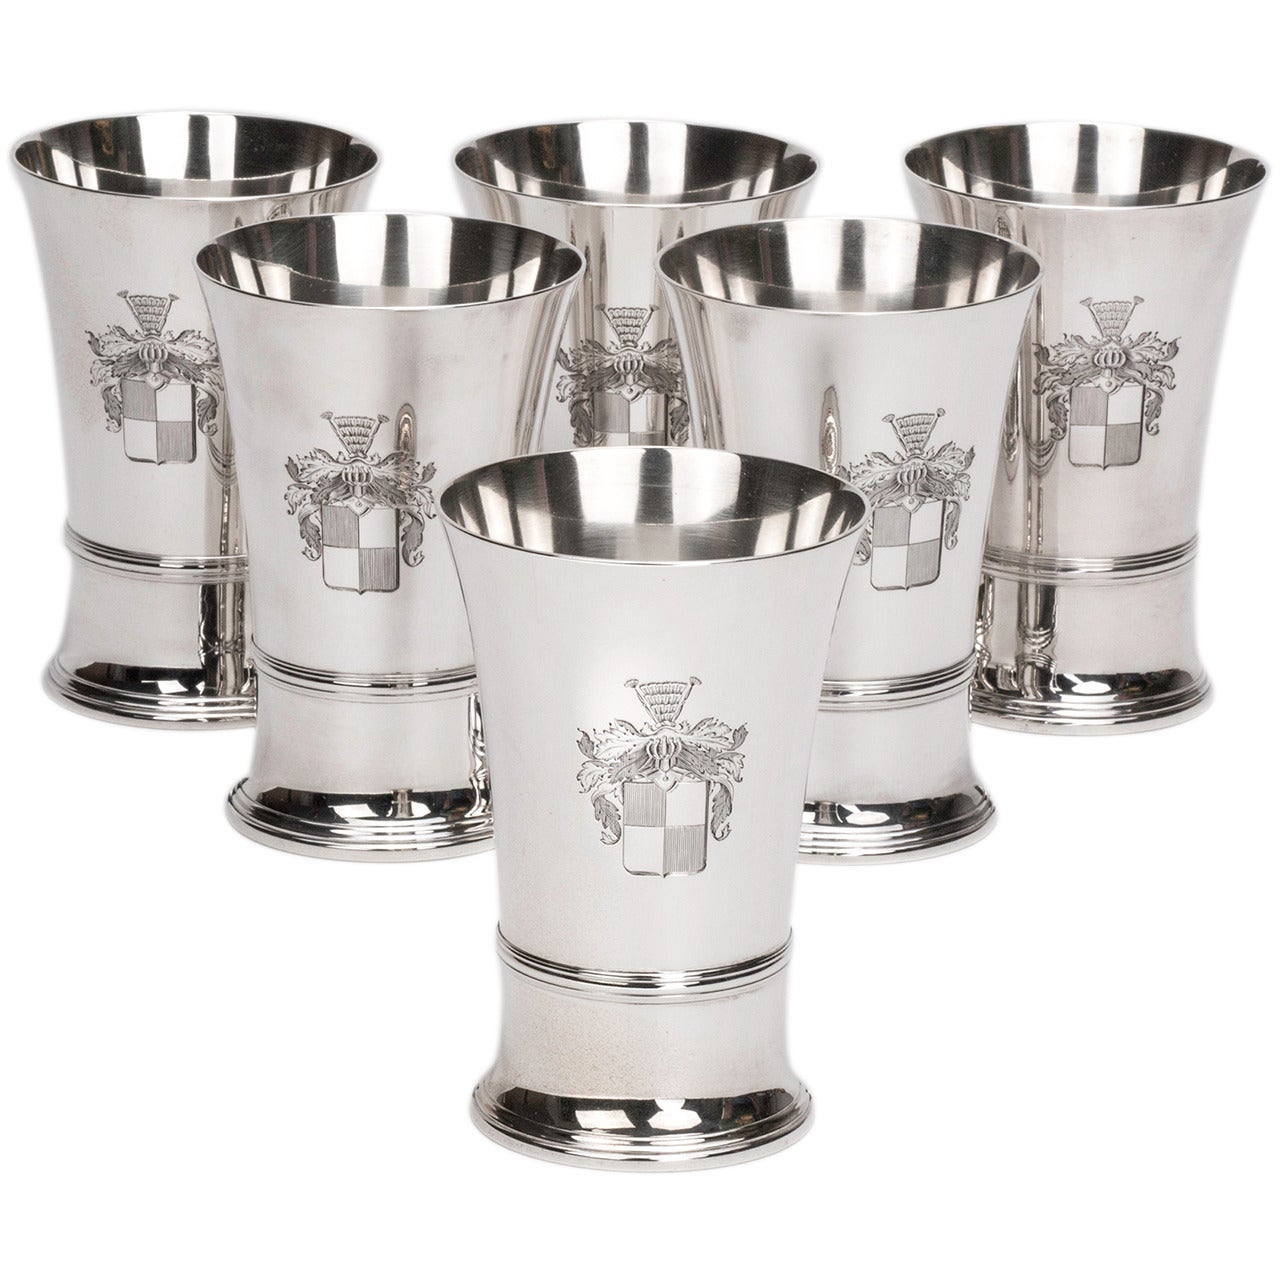 Tiffany & Co. Sterling Silver Tumblers or Cups, Set of Six